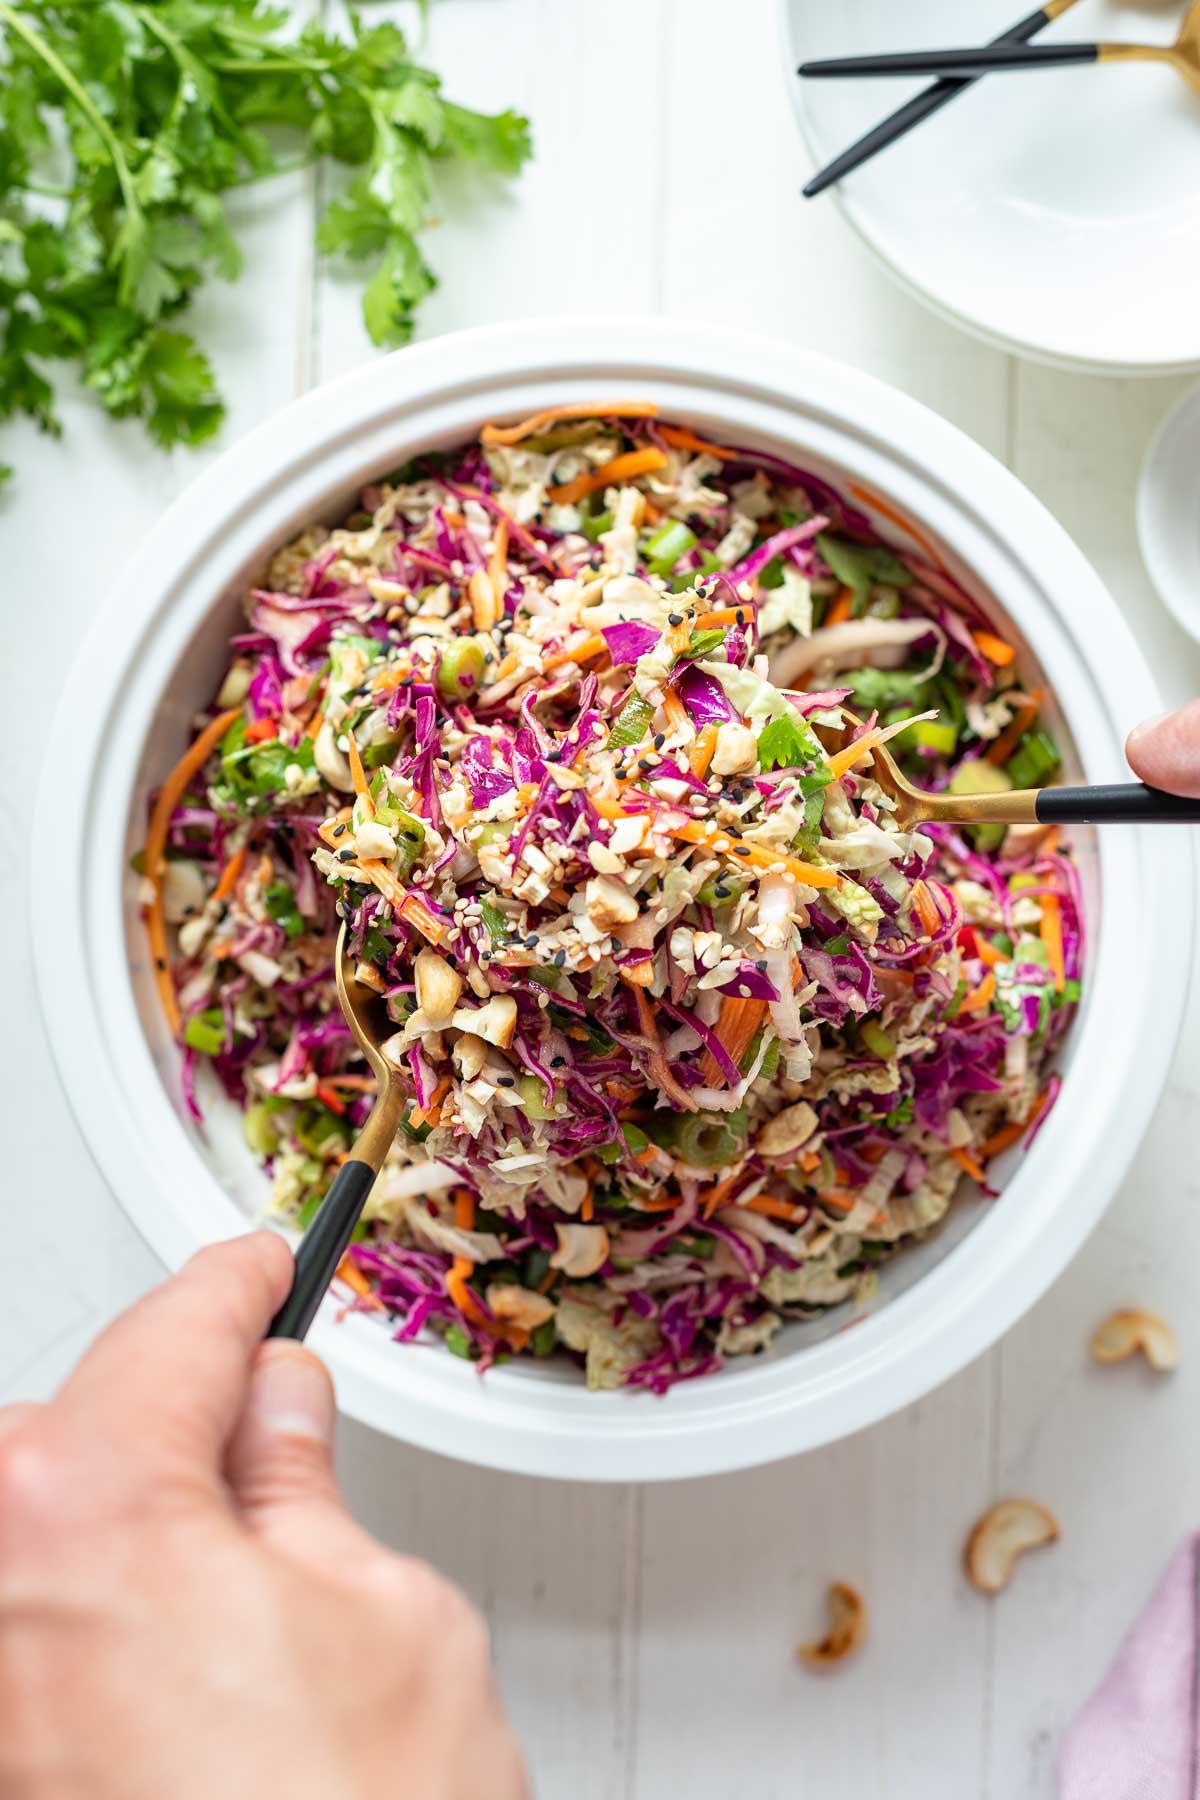 Asian Coleslaw with red and white cabbage, carrot, spring onions and cilantro